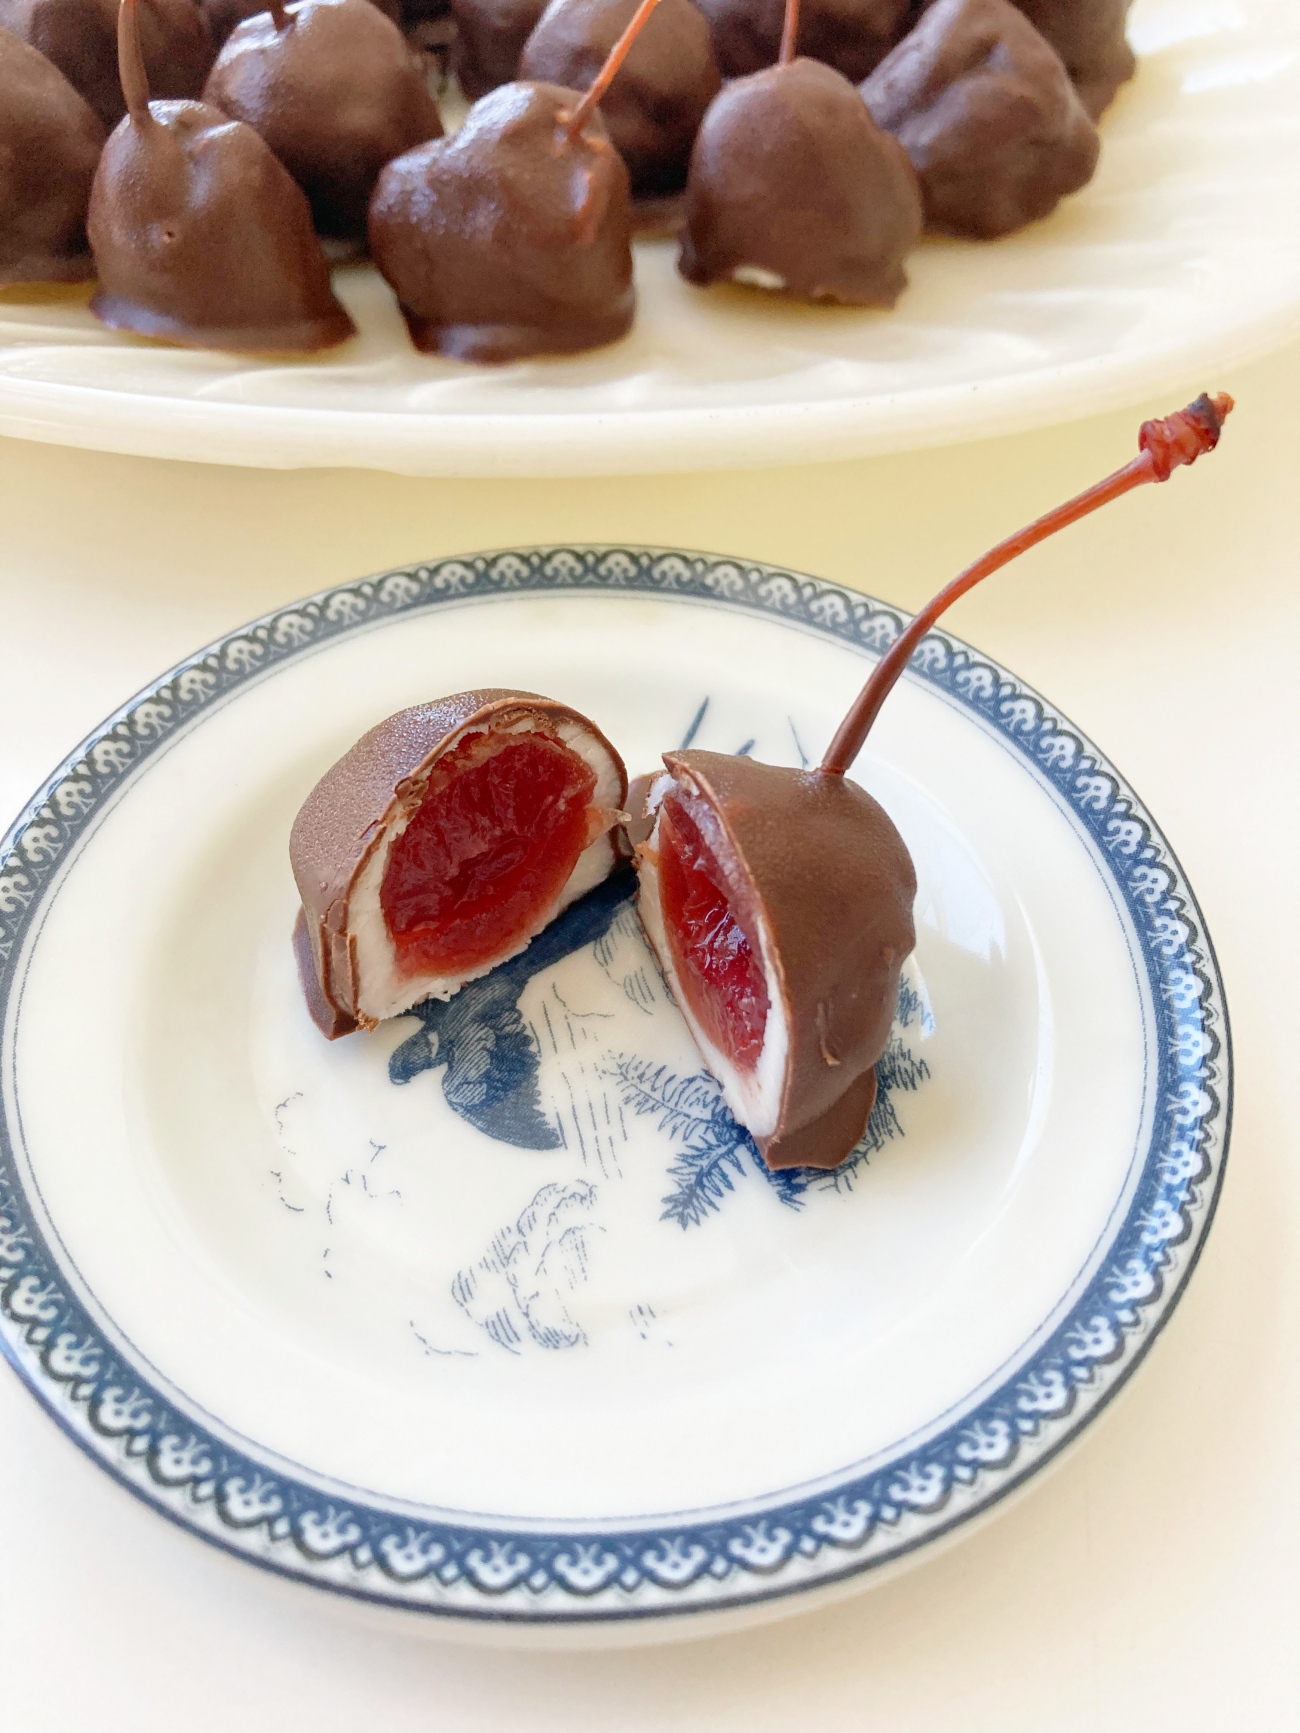 Donna's Chocolate-covered Cherries